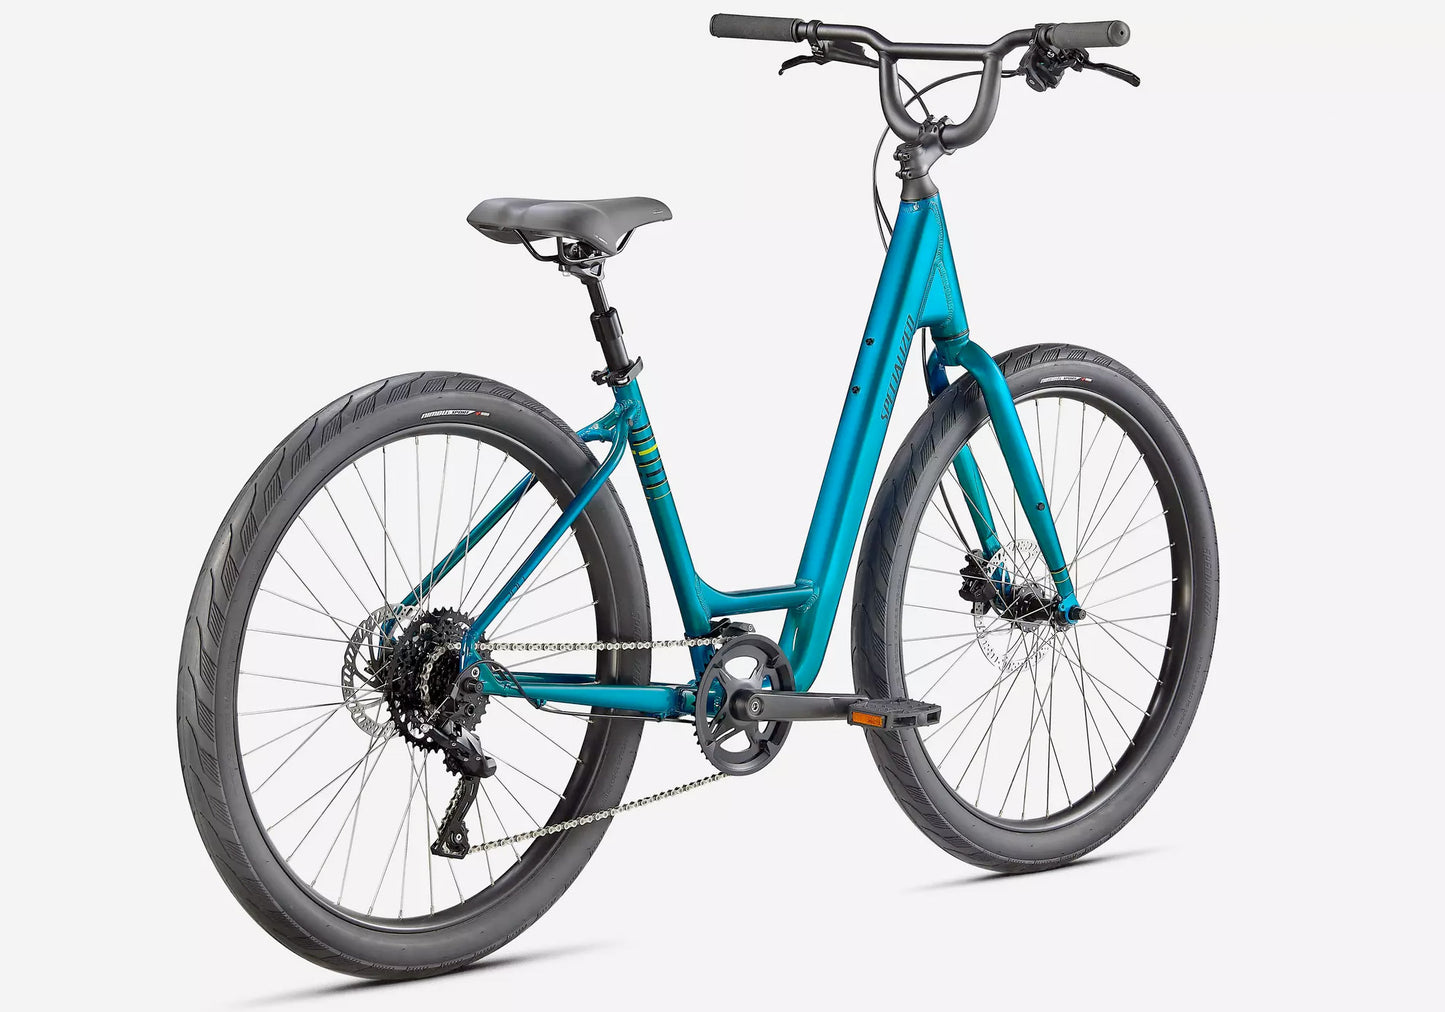 Specialized Roll 3.0 Low Step Unisex Fitness/Urban Bike - Gloss Teal Tint